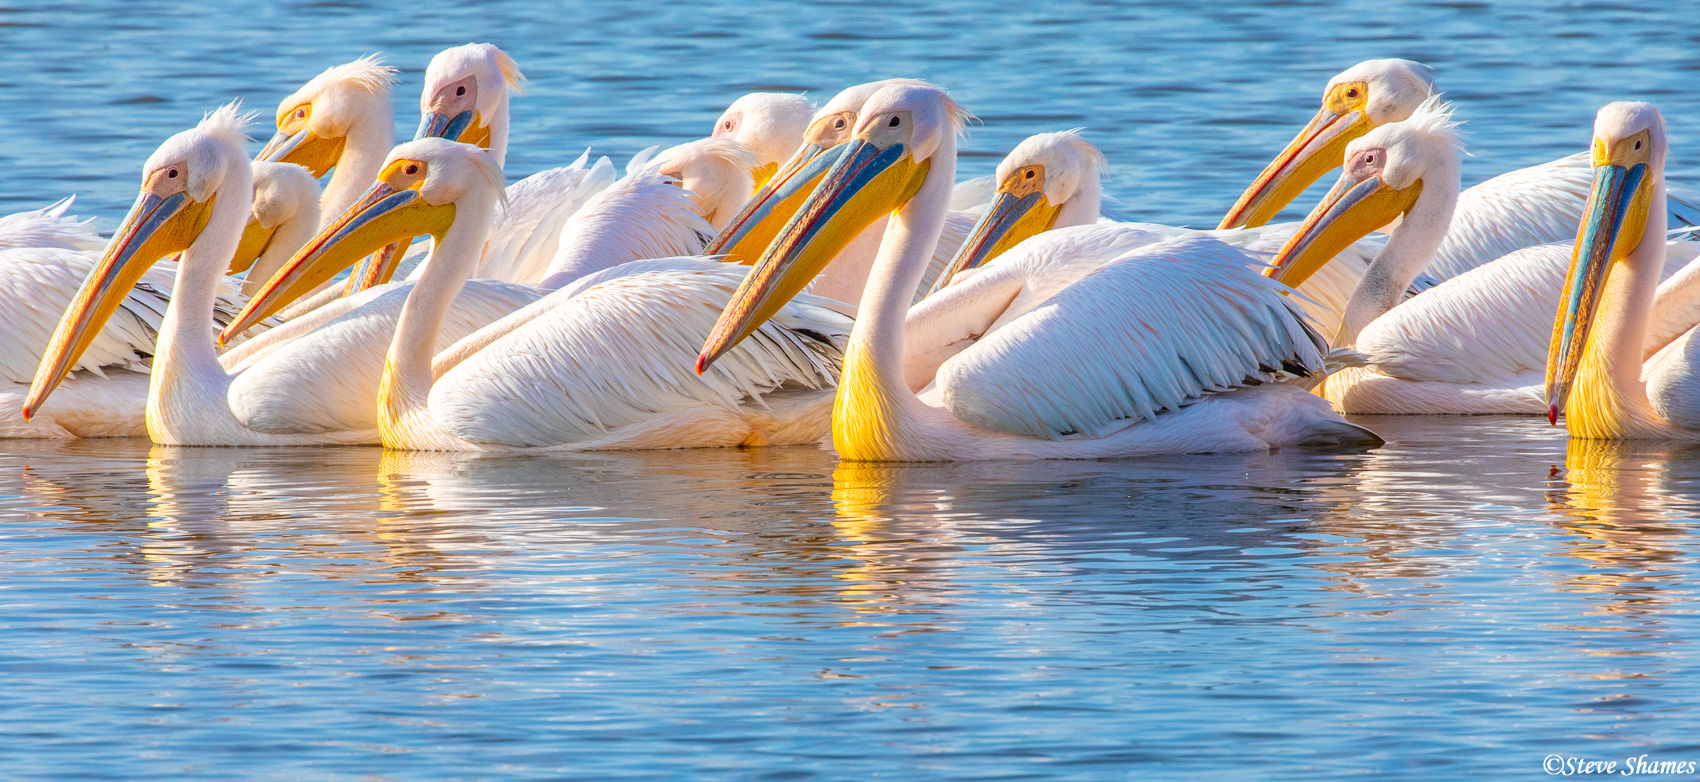 I like the colorful yellow and blue bills of these pelicans.